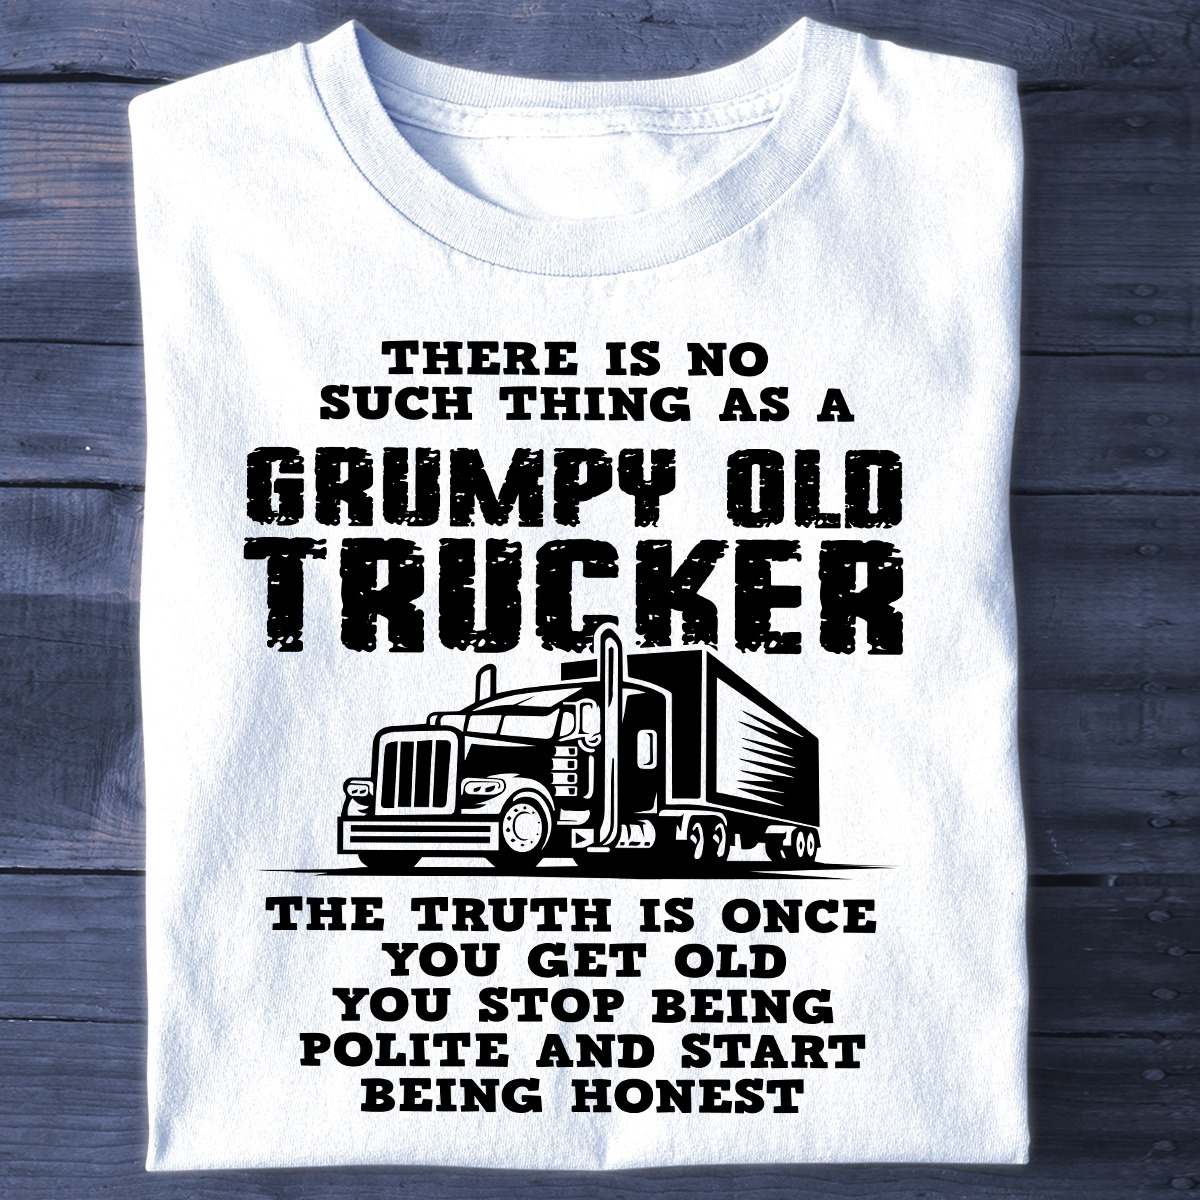 Grumpy Old Trucker - There is no such thing as a grumpy old trucker the truth is once you get old